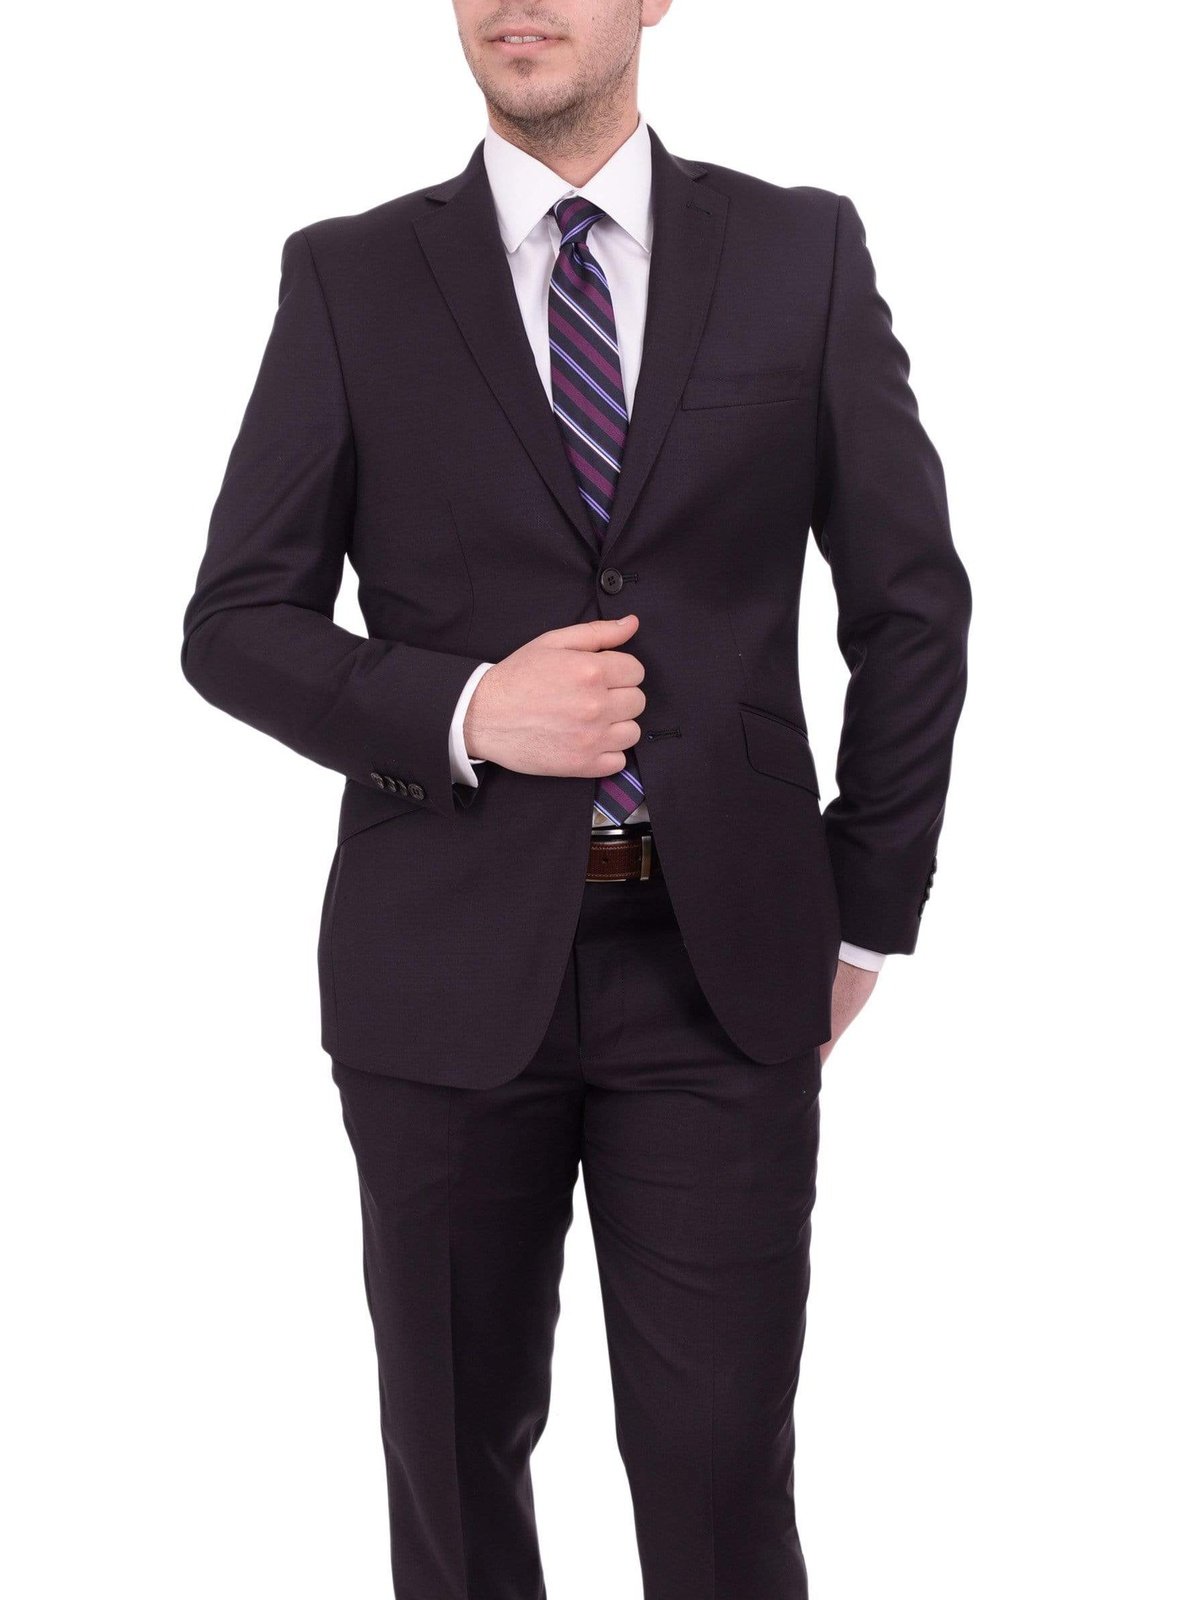 Ideal TWO PIECE SUITS 38R Ideal Slim Fit Solid Plum Purple Two Button Wool Suit